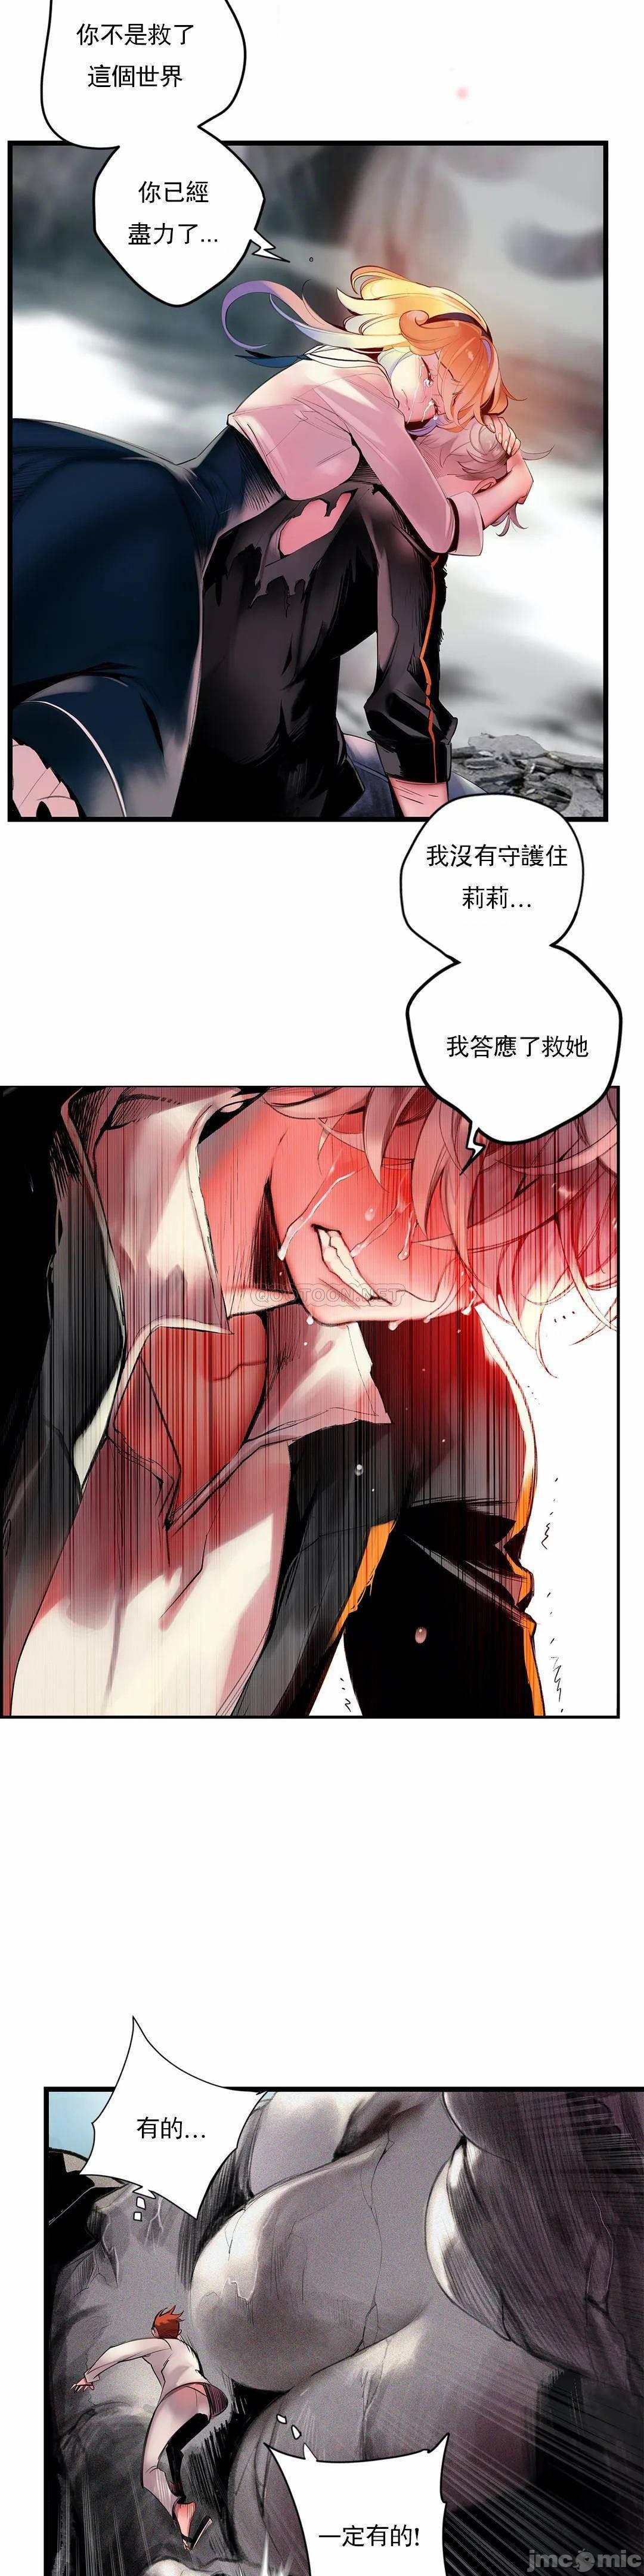 [Juder] Lilith`s Cord (第二季) Ch.77-93 end [Chinese] 477